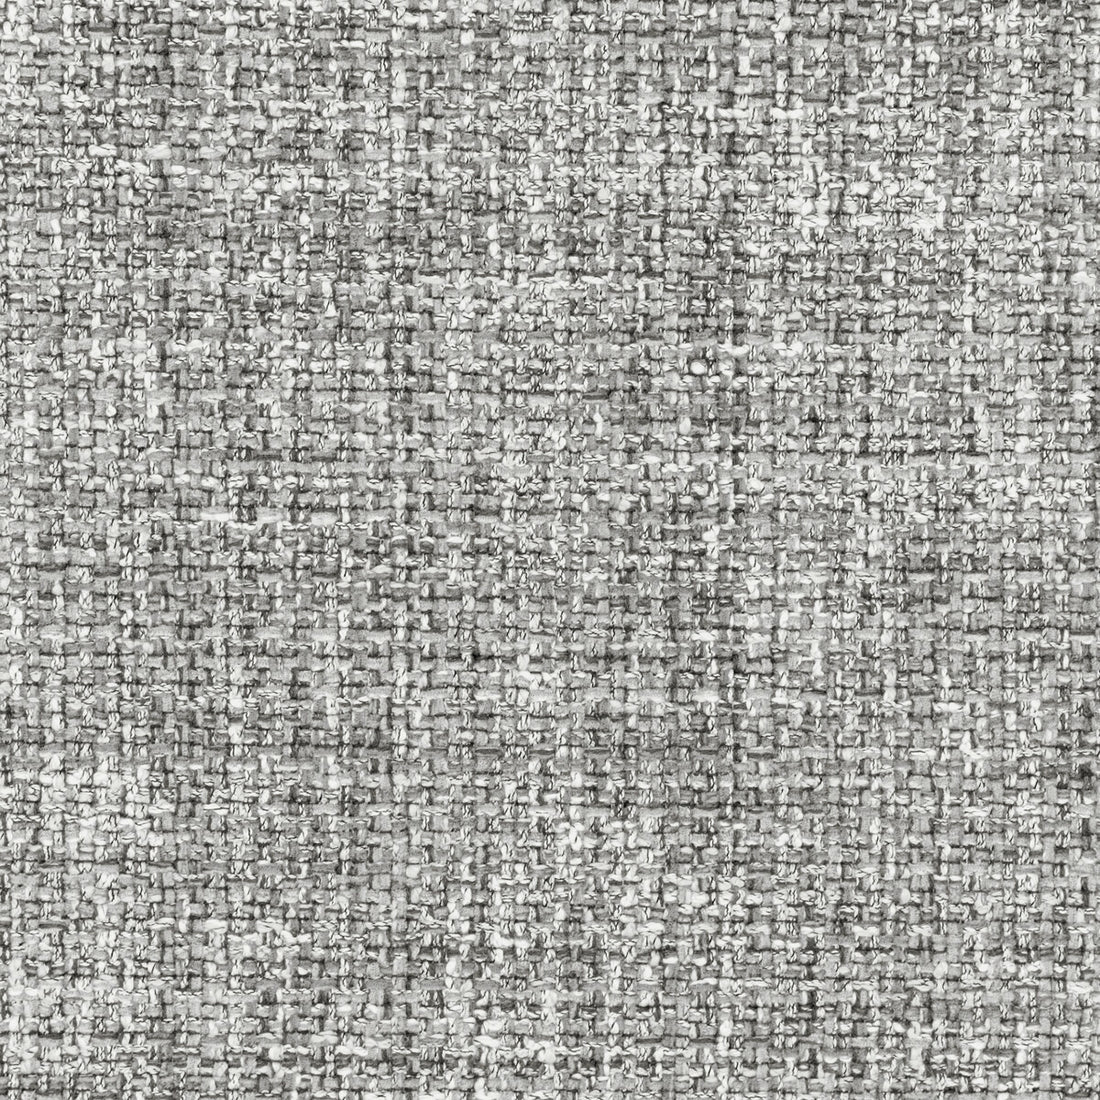 Tailored Plaid fabric in grey color - pattern 36099.11.0 - by Kravet Couture in the Luxury Textures II collection